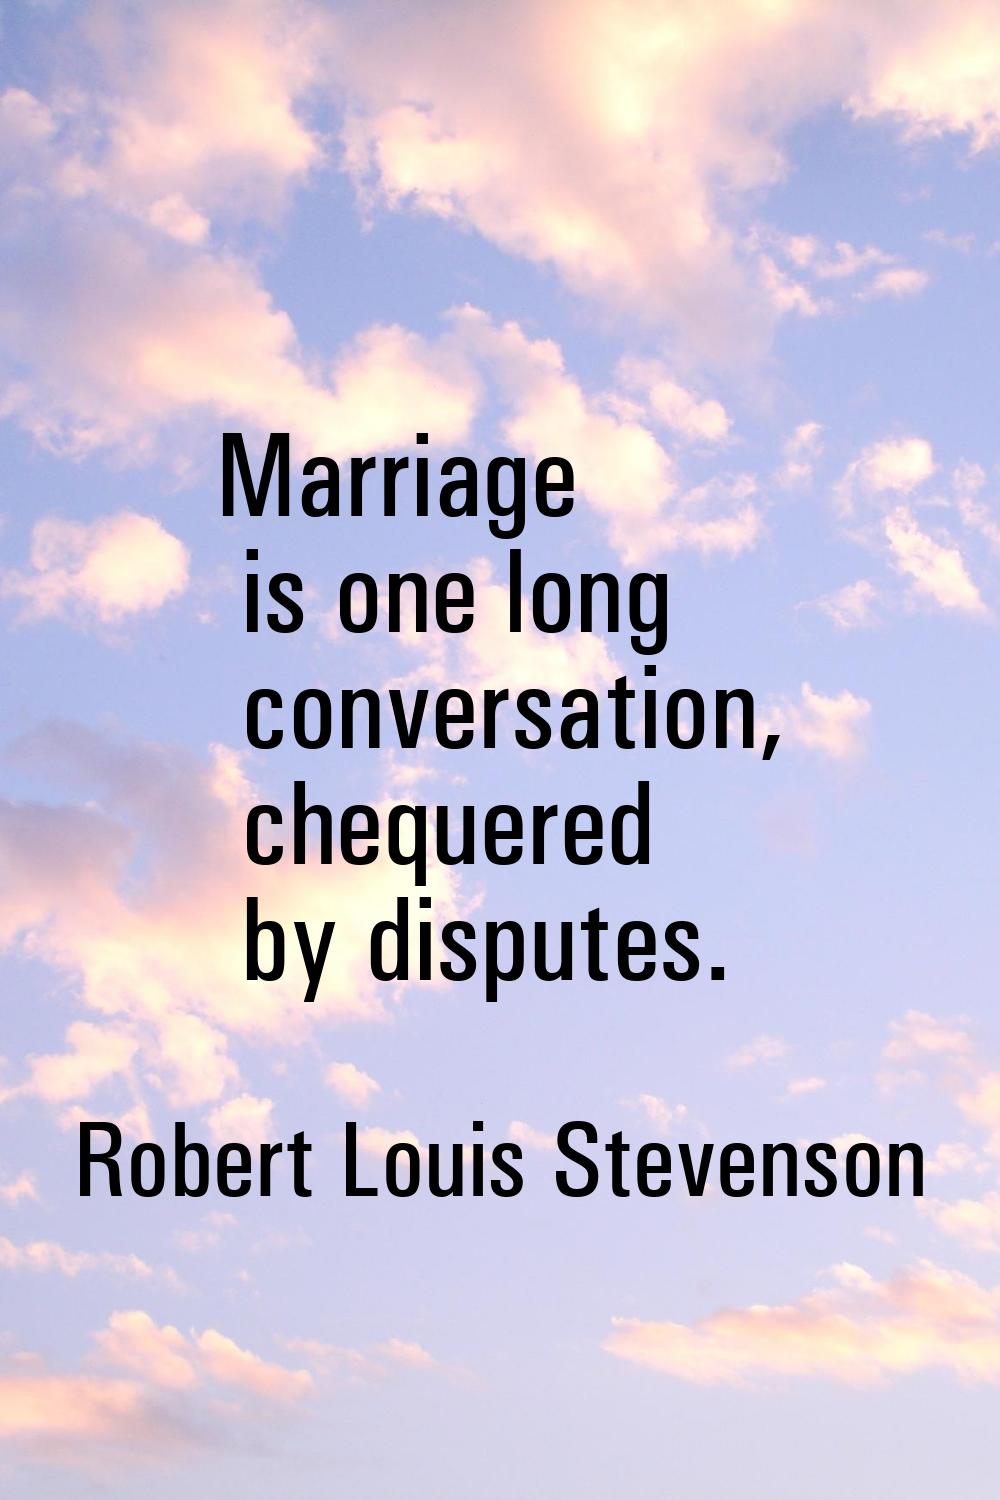 Marriage is one long conversation, chequered by disputes.